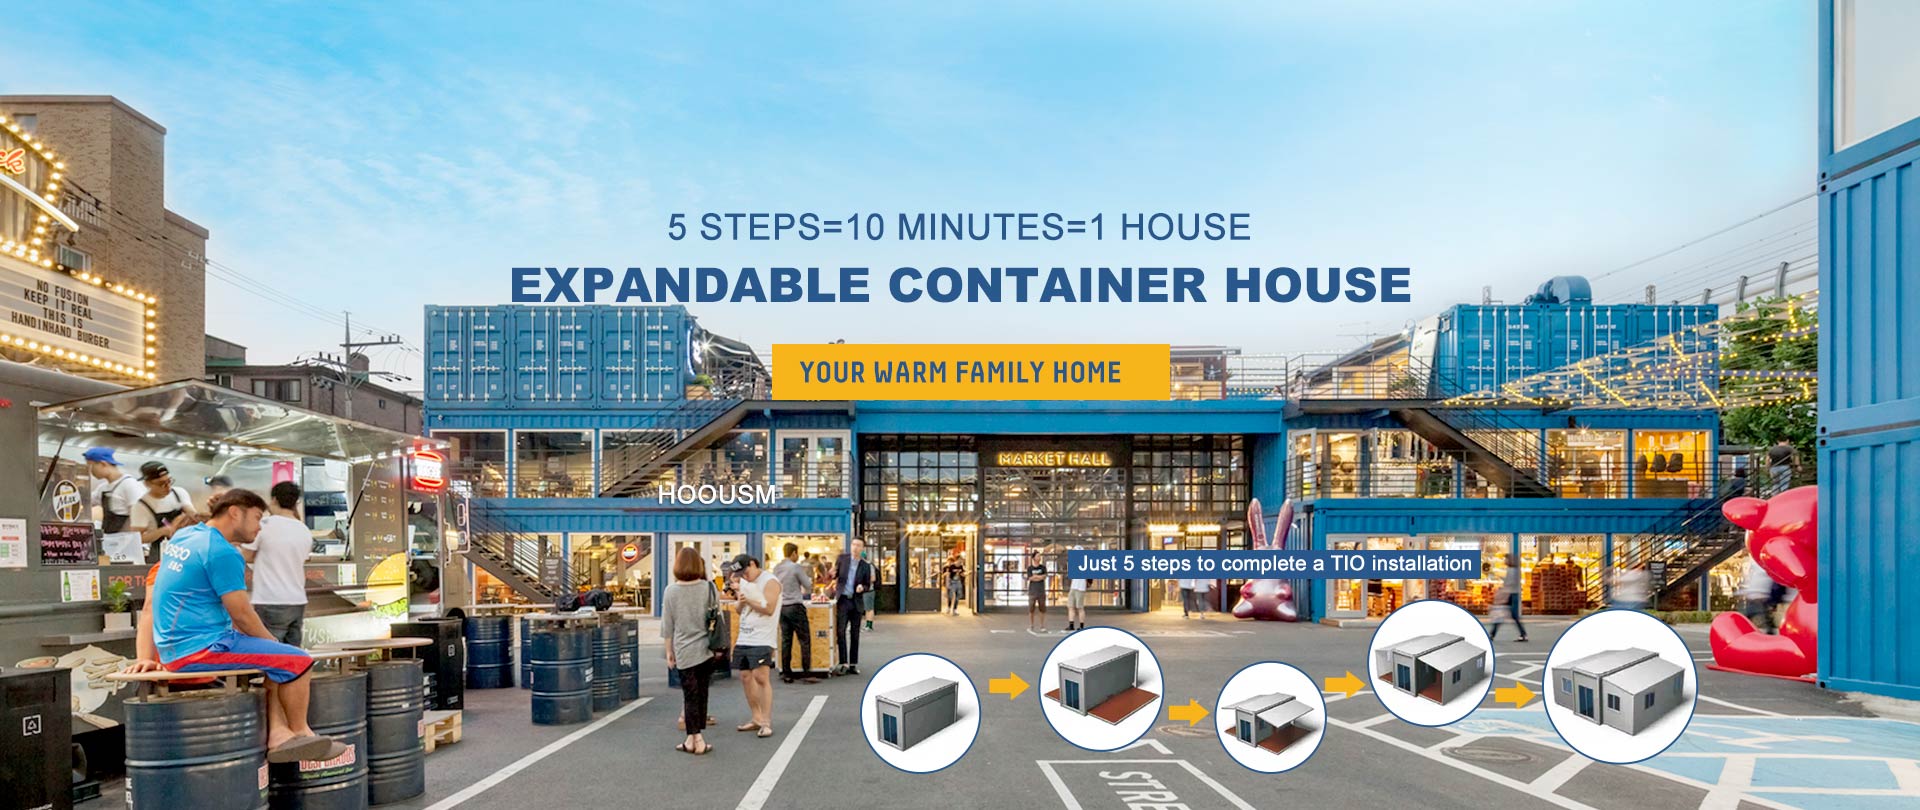 Kan utvides Container Hus